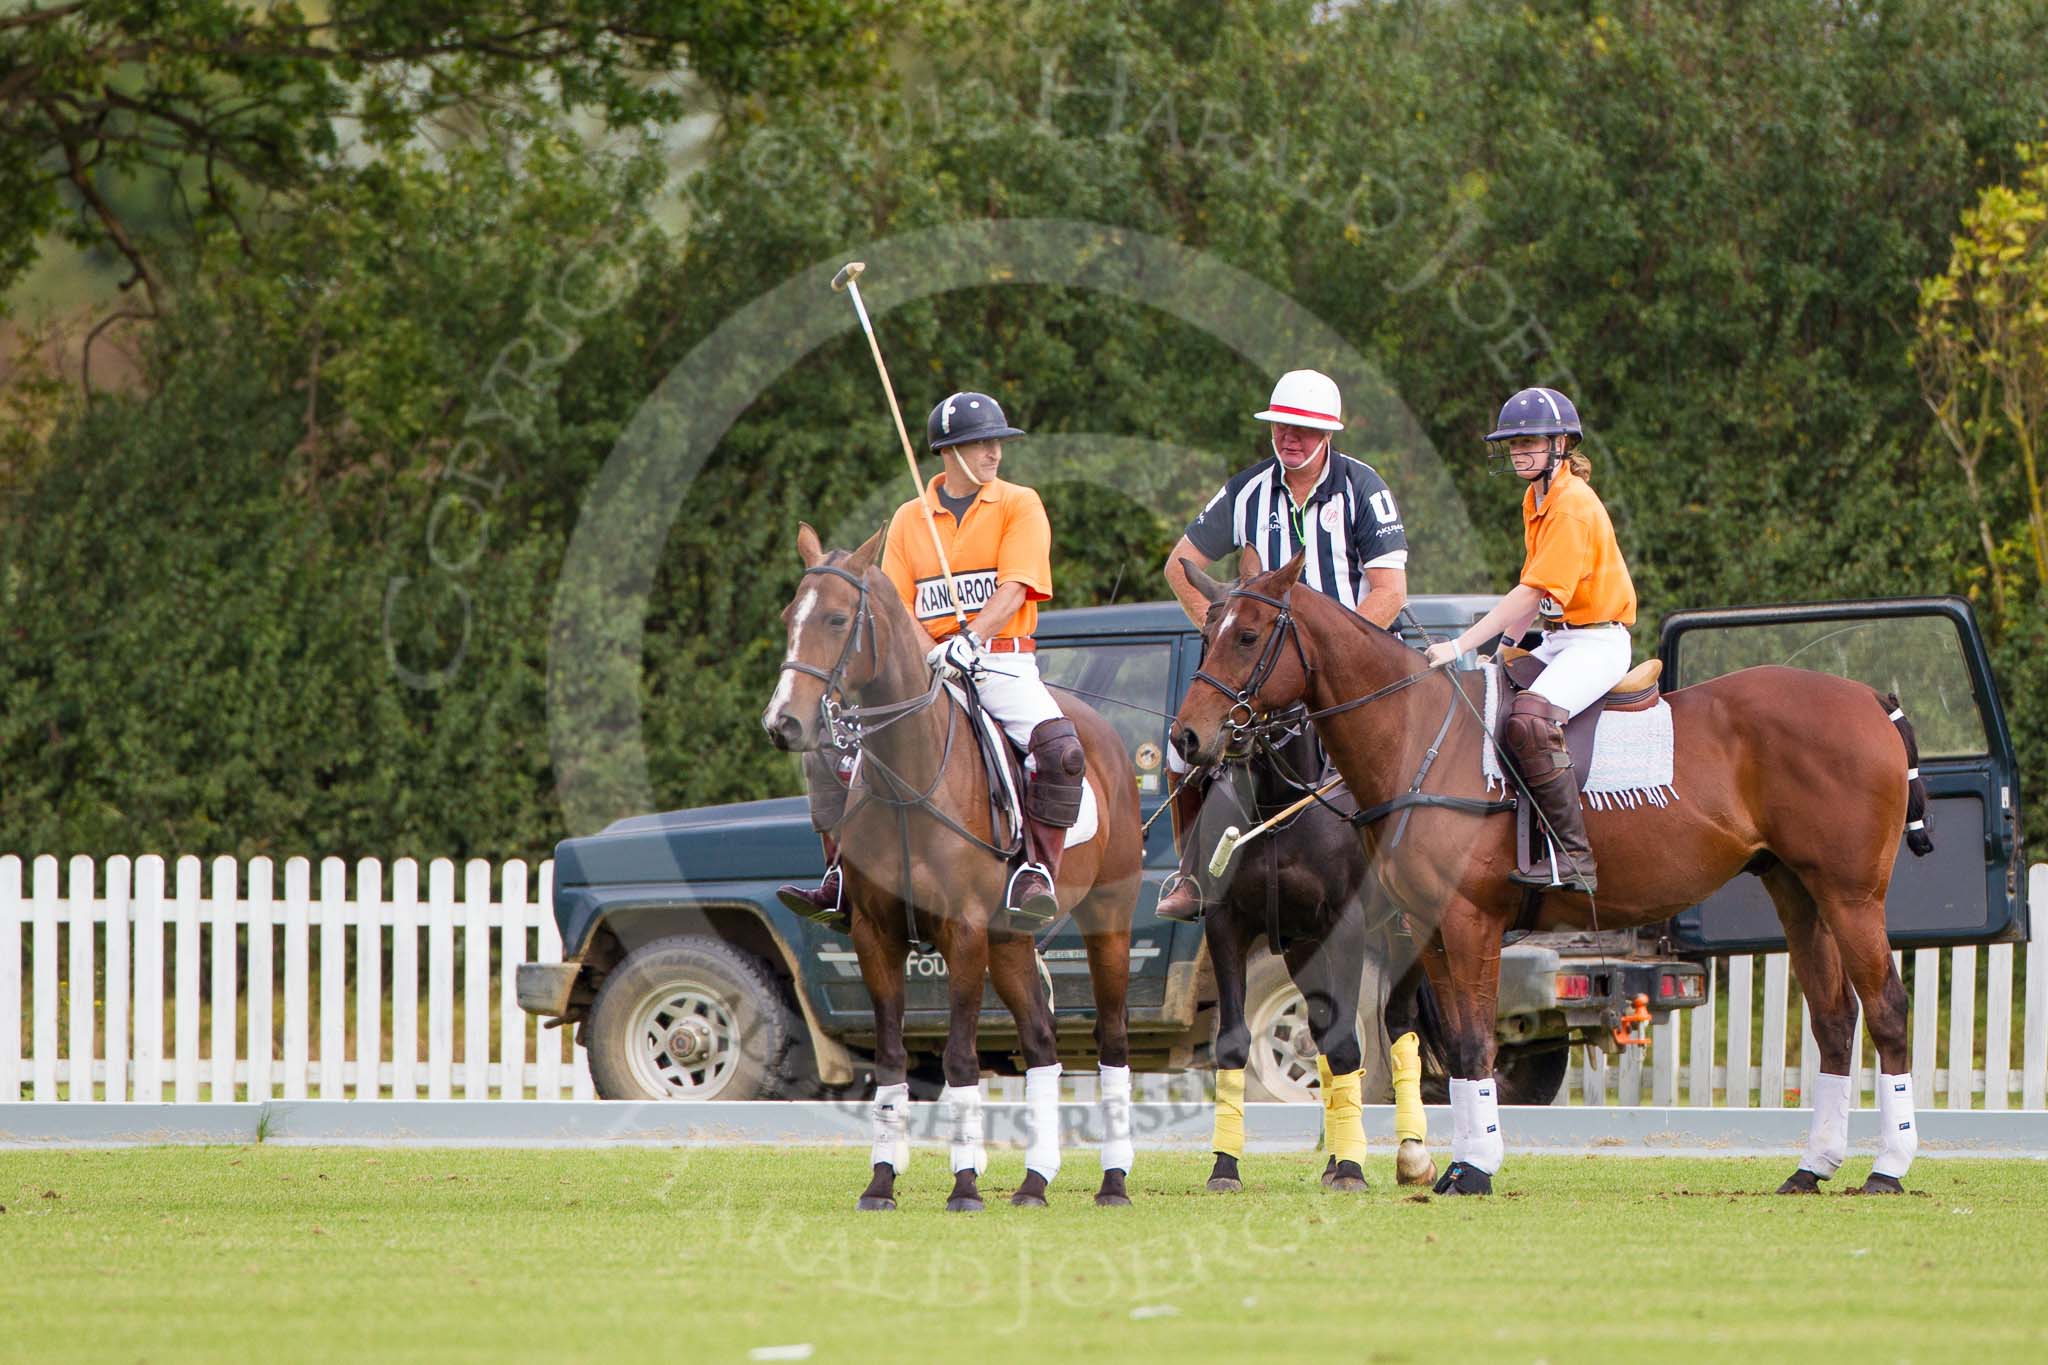 DBPC Polo in the Park 2012: The umpire and club polo manager Ian 'Ginger' Hunt with Huv Bevan and Amy Harper of the Kangaroos team..
Dallas Burston Polo Club,
Stoneythorpe Estate,
Southam,
Warwickshire,
United Kingdom,
on 16 September 2012 at 10:11, image #30